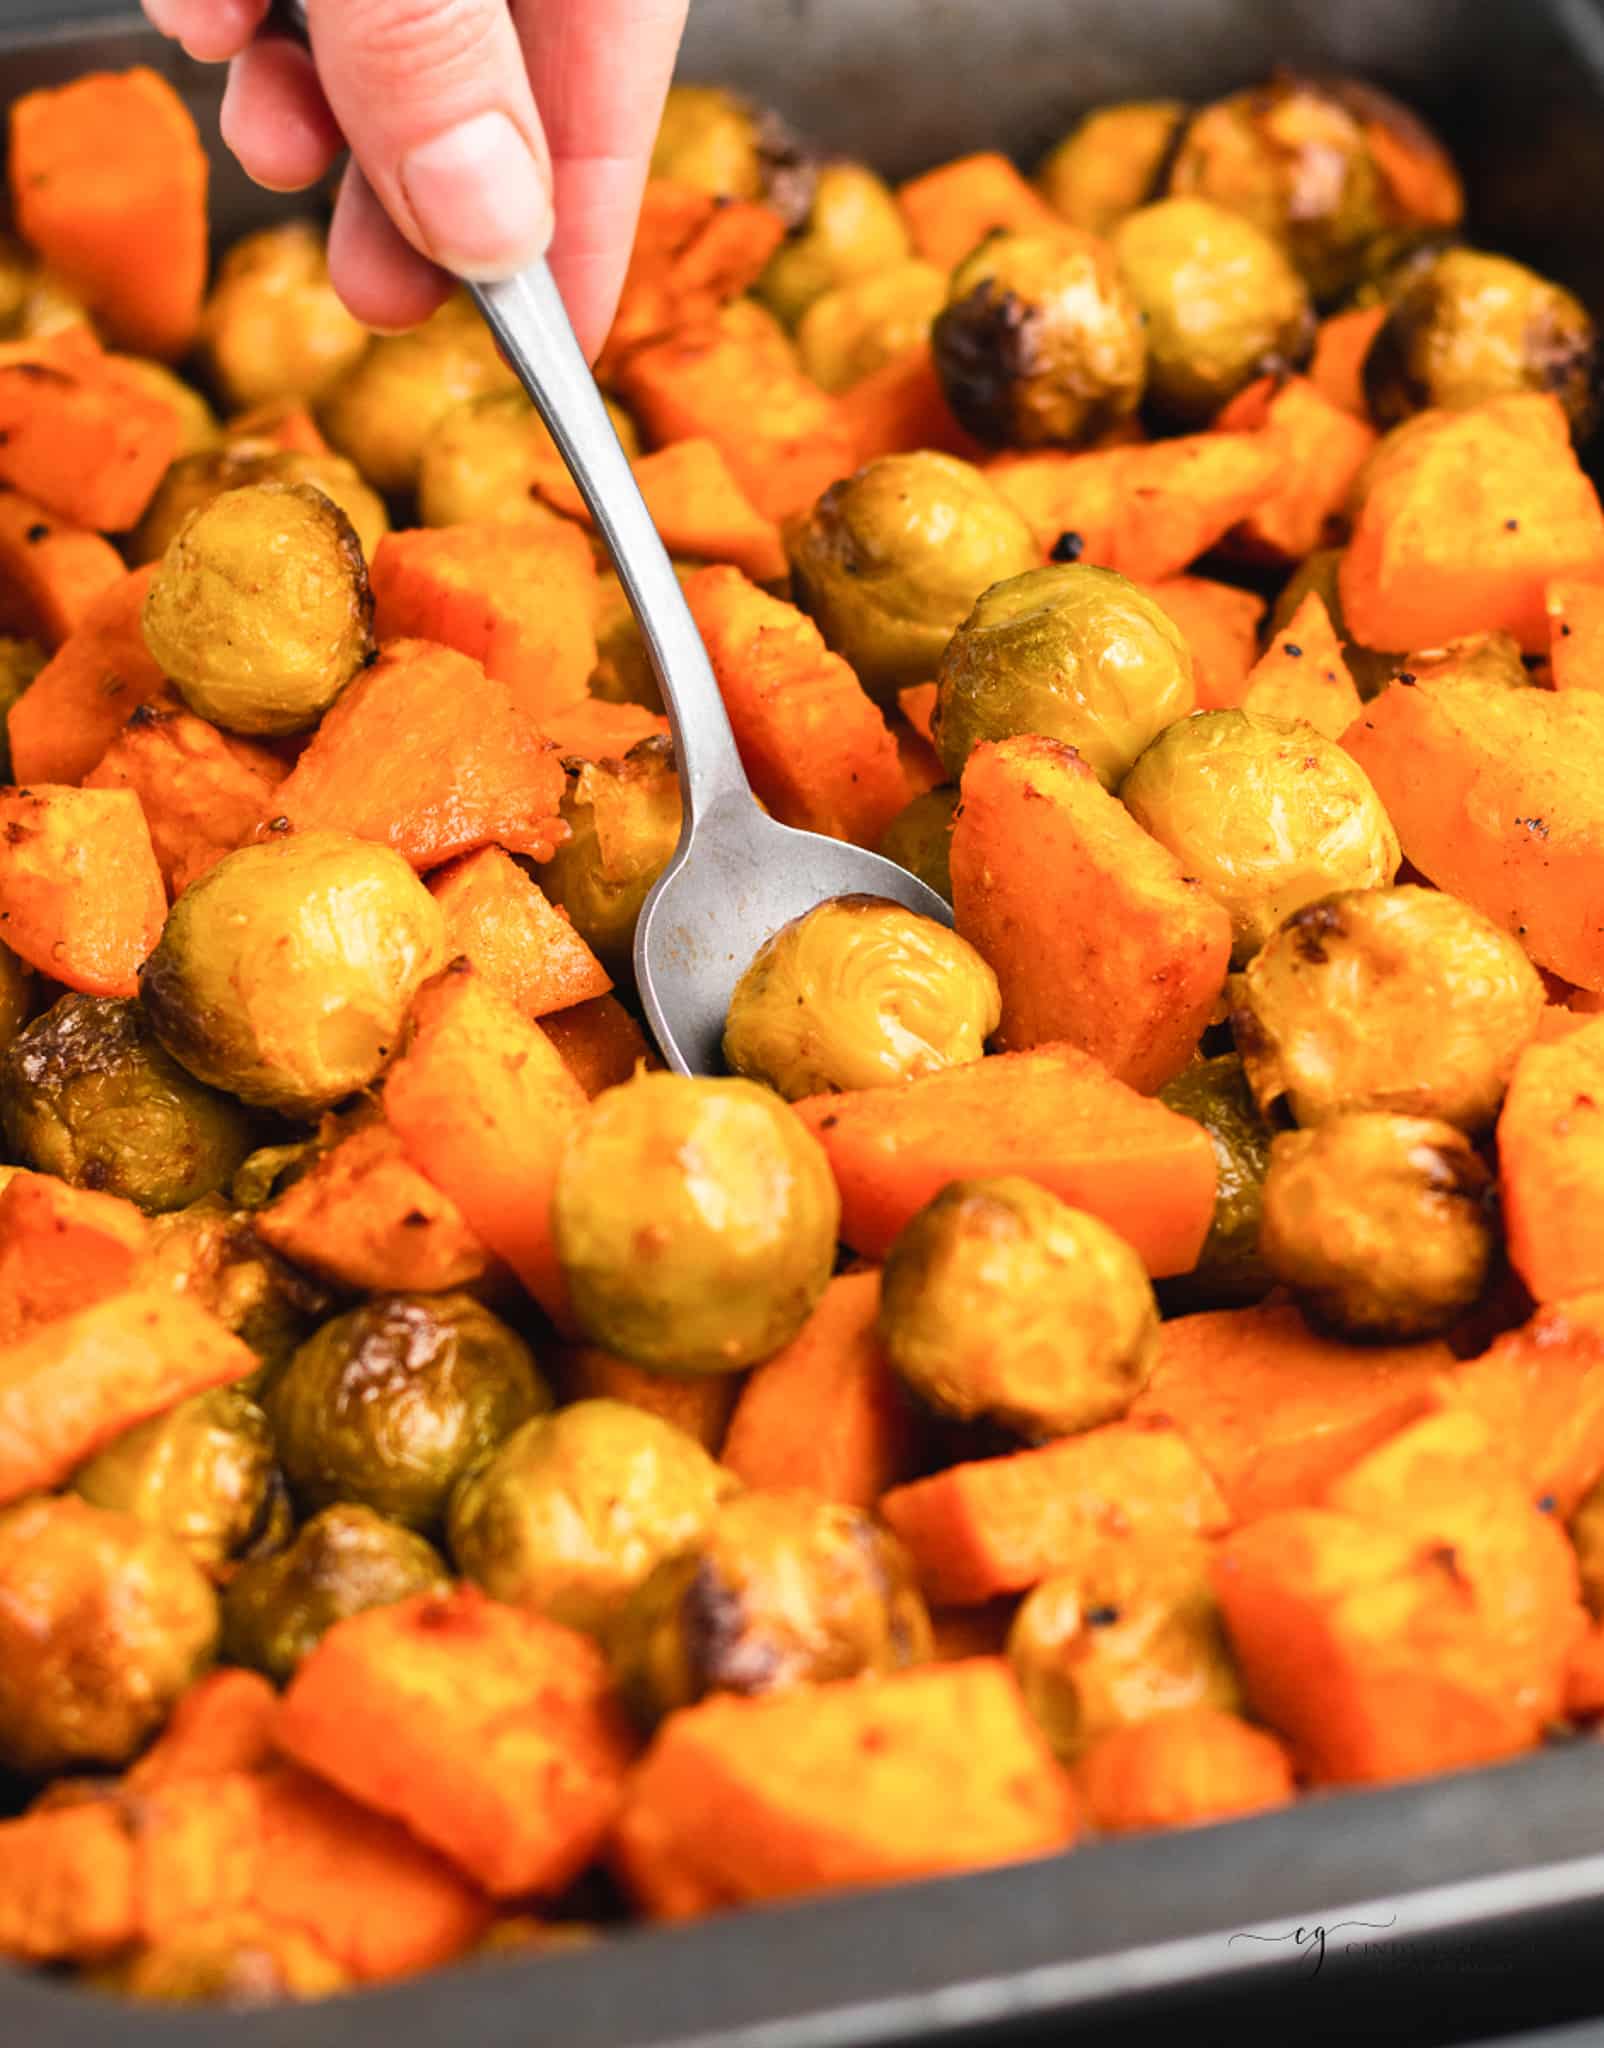 a pan of roasted sweet potatoes and brussel sprouts with a serving spoon in it.